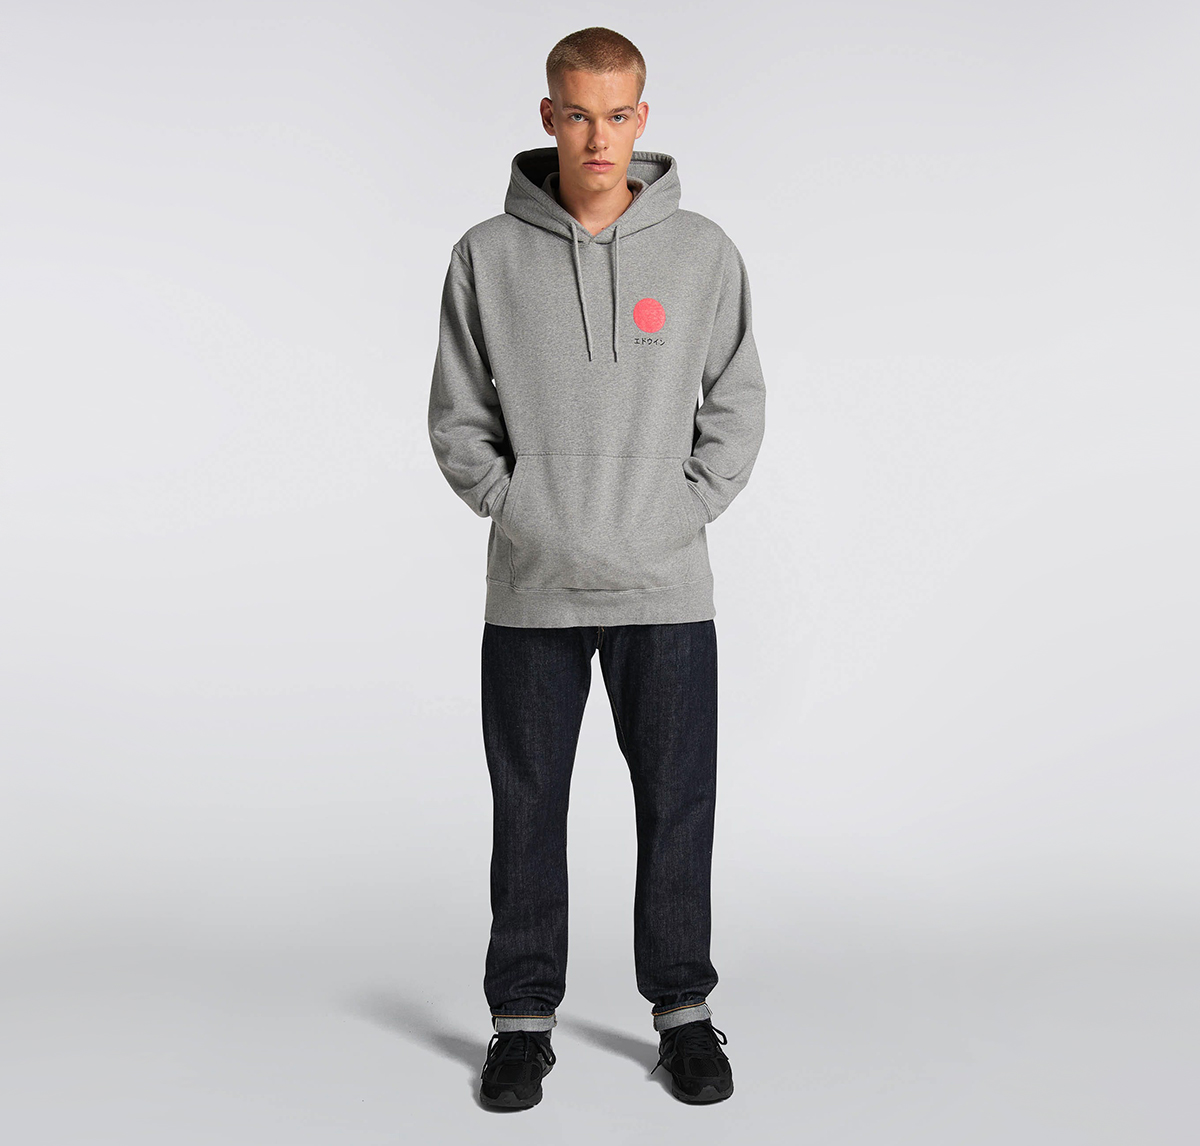 EDWIN Japanese Sun Hoodie - Mid Grey Marl outfit